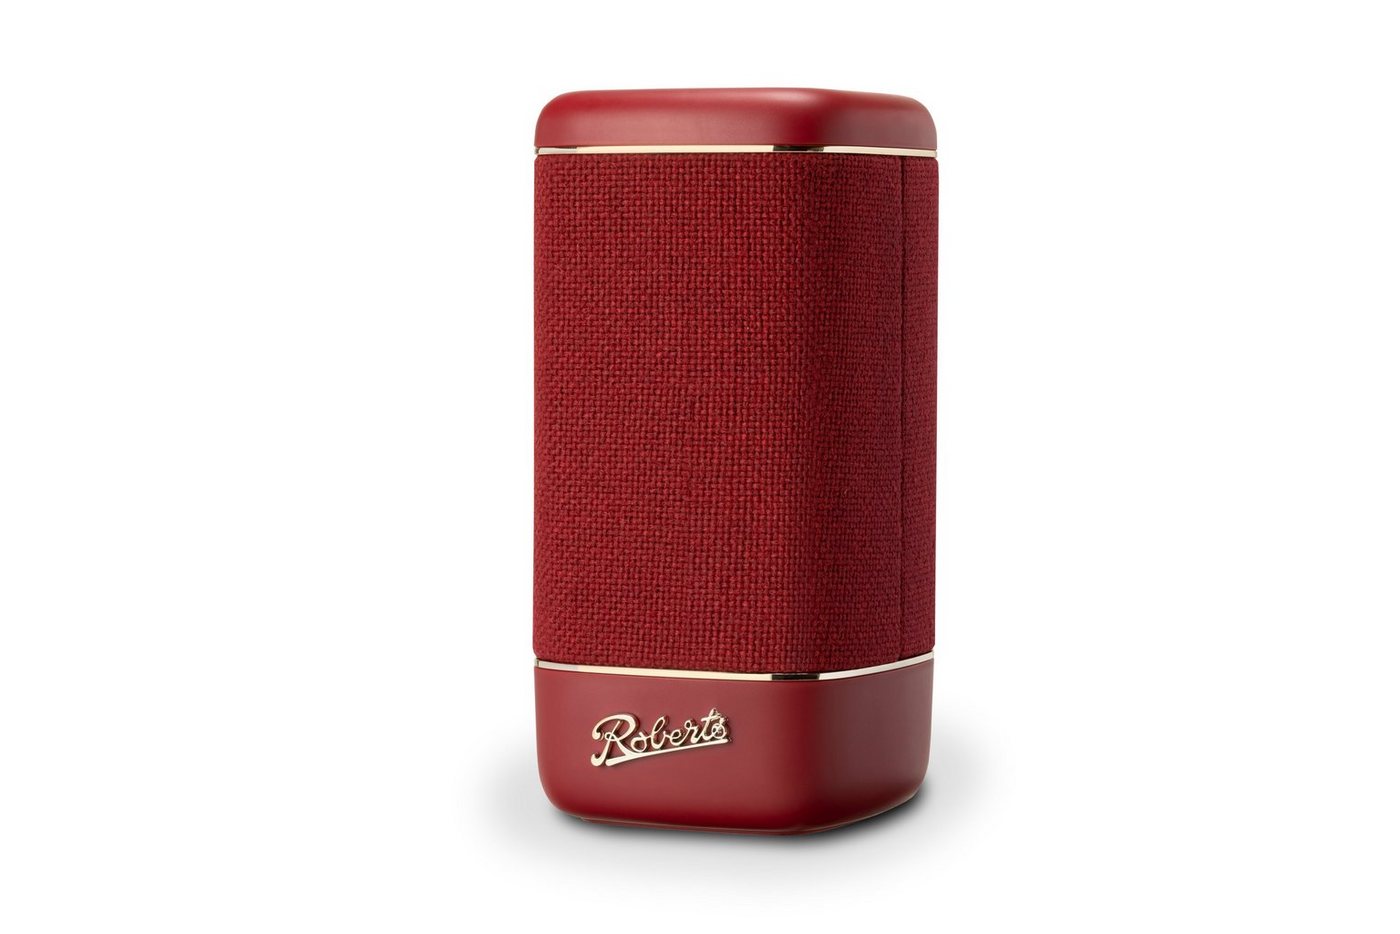 ROBERTS BEACON 335, berry red, Bluetooth-Lautsprecher Bluetooth-Lautsprecher von ROBERTS